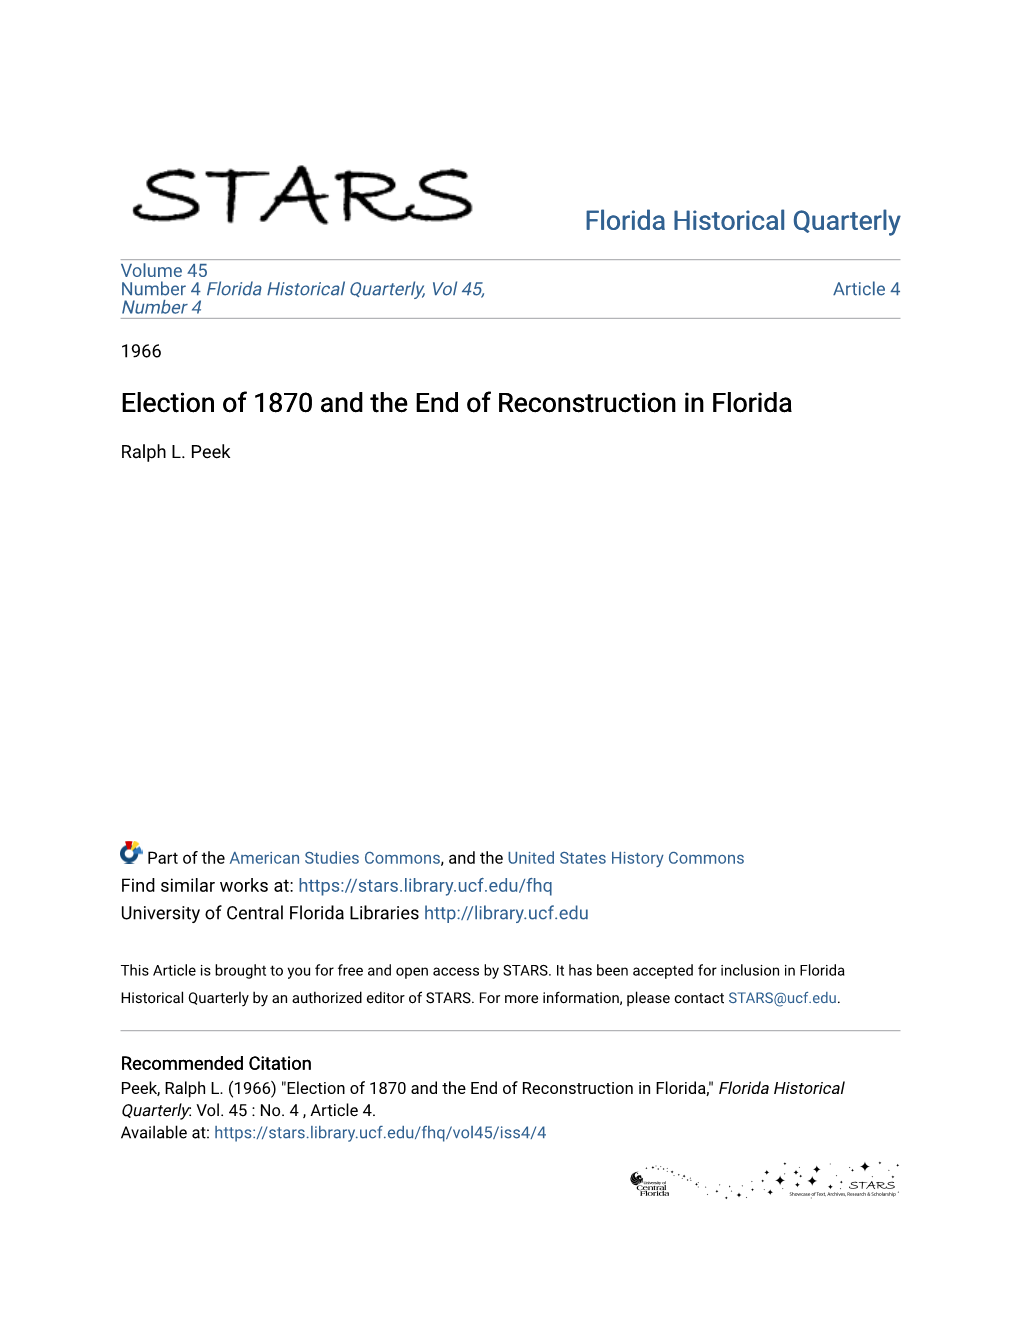 Election of 1870 and the End of Reconstruction in Florida